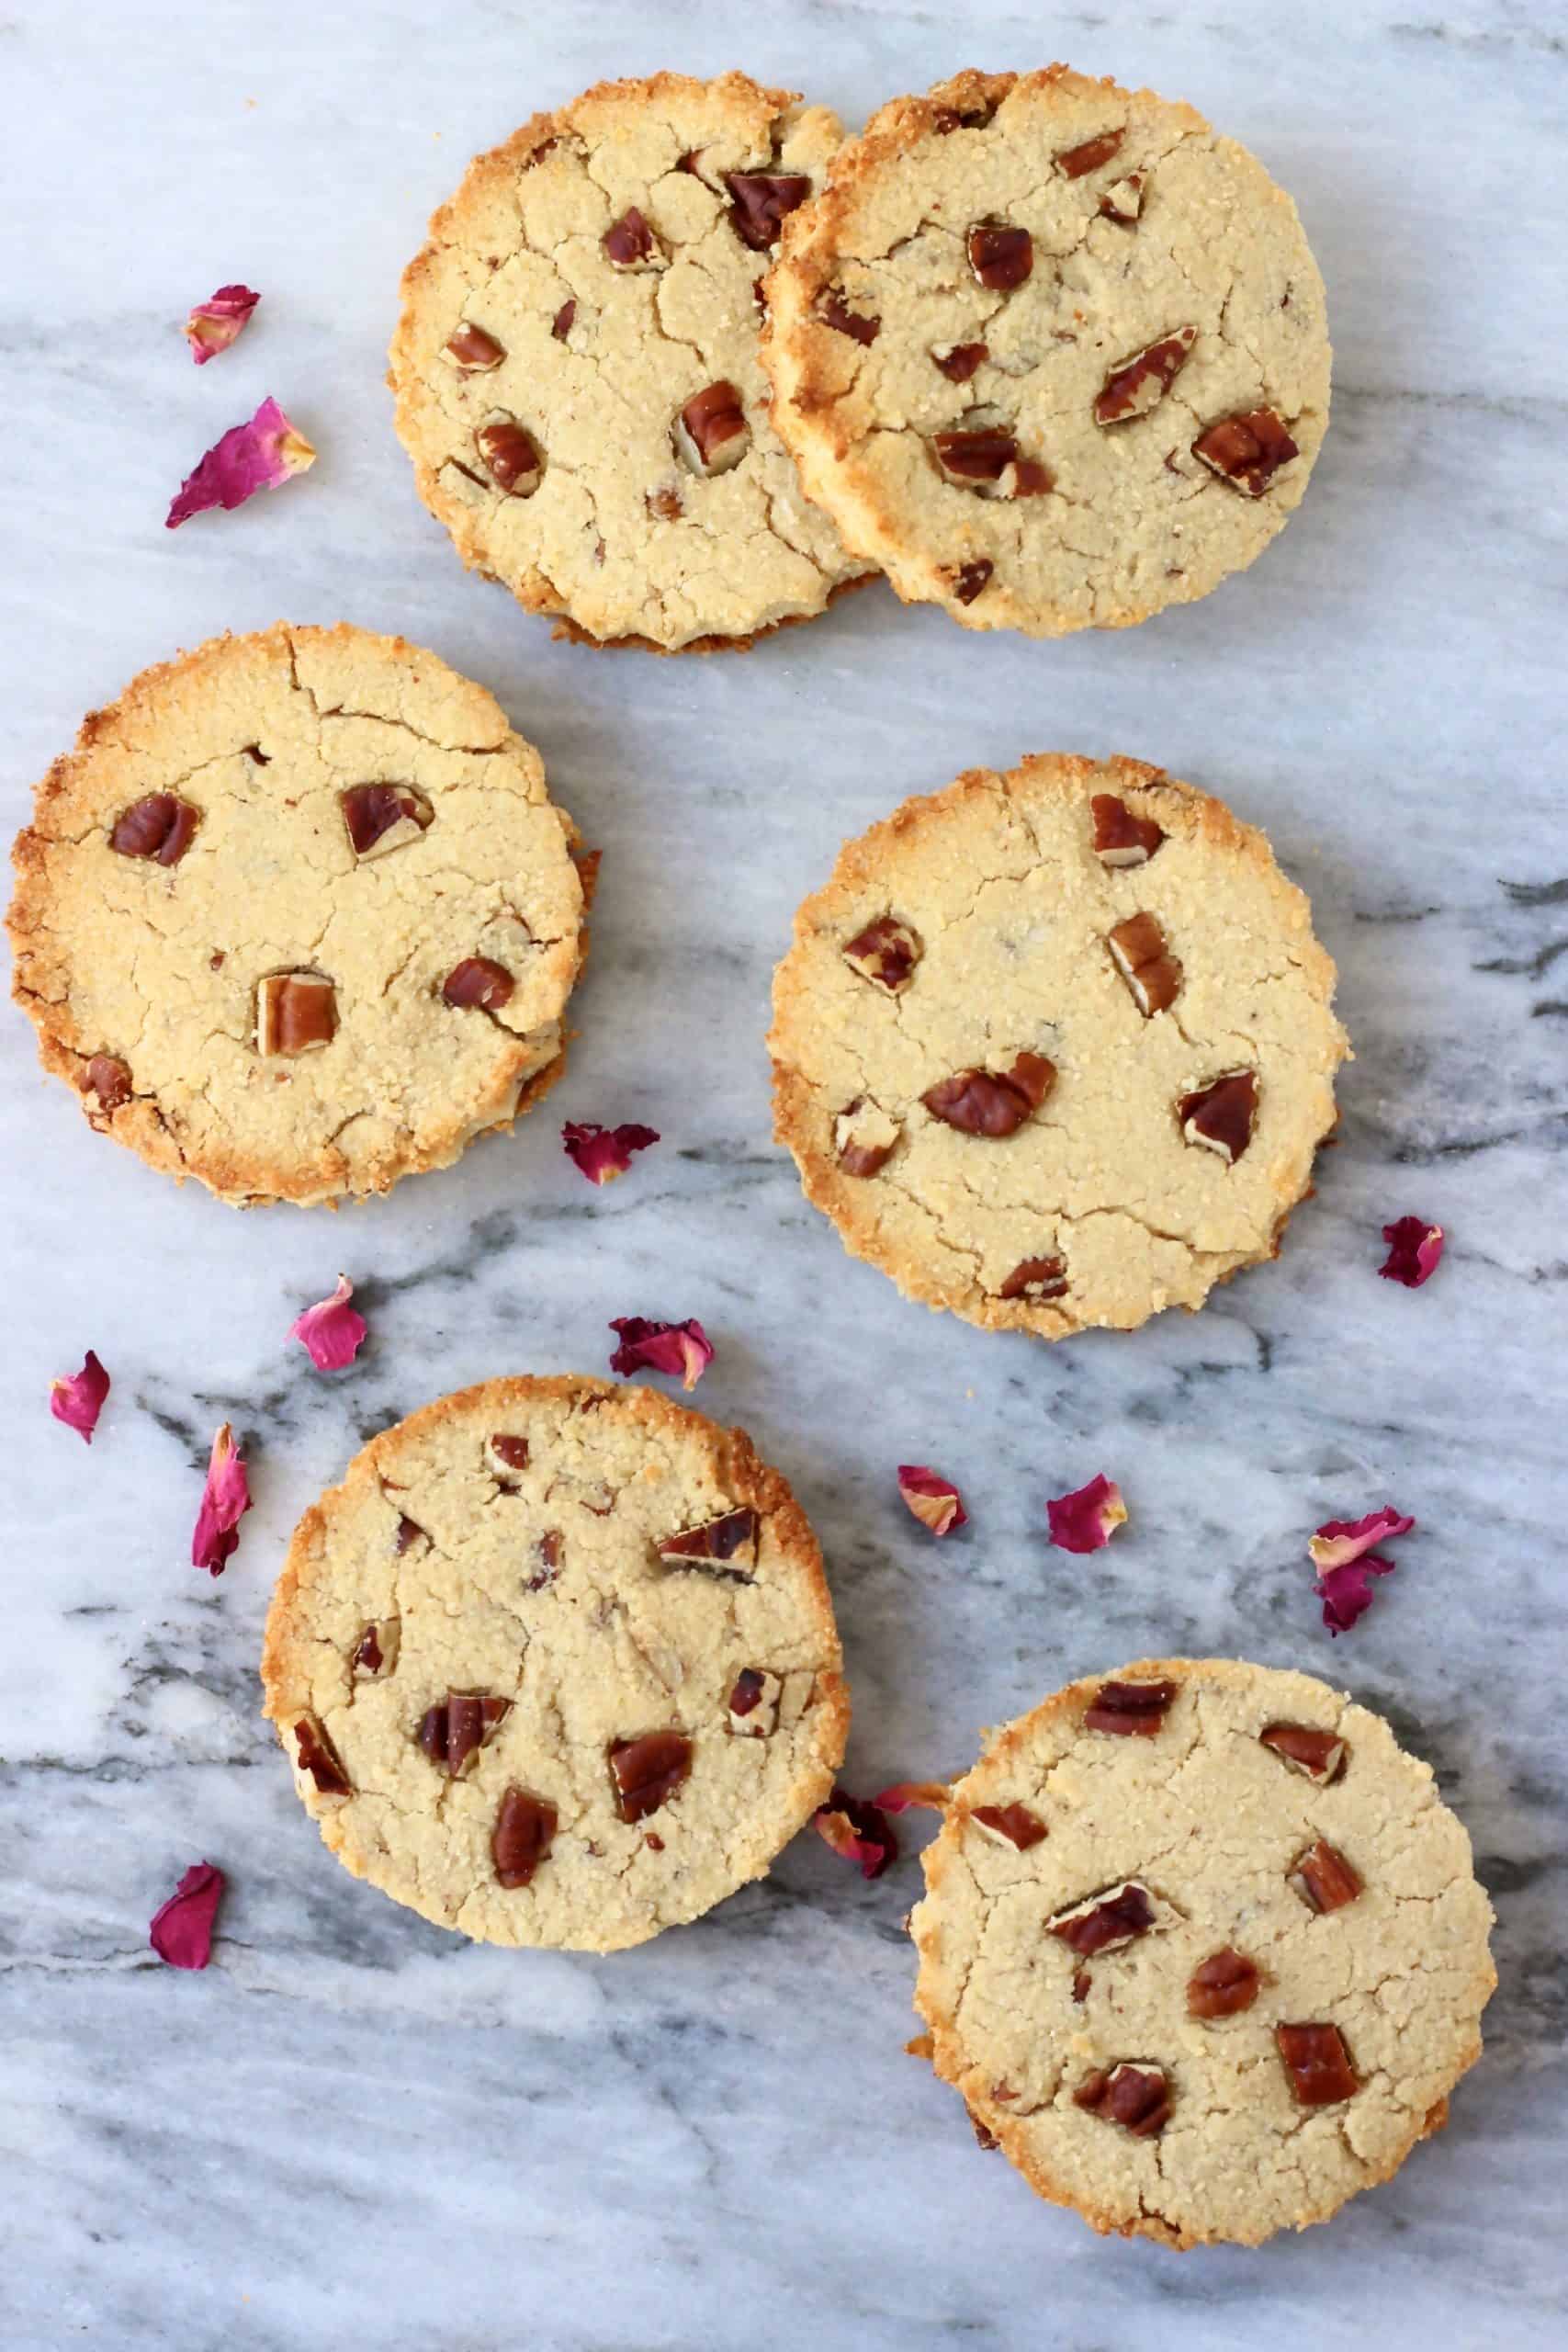 Six round cookies with pecan nuts against a marble background scattered with rose petals